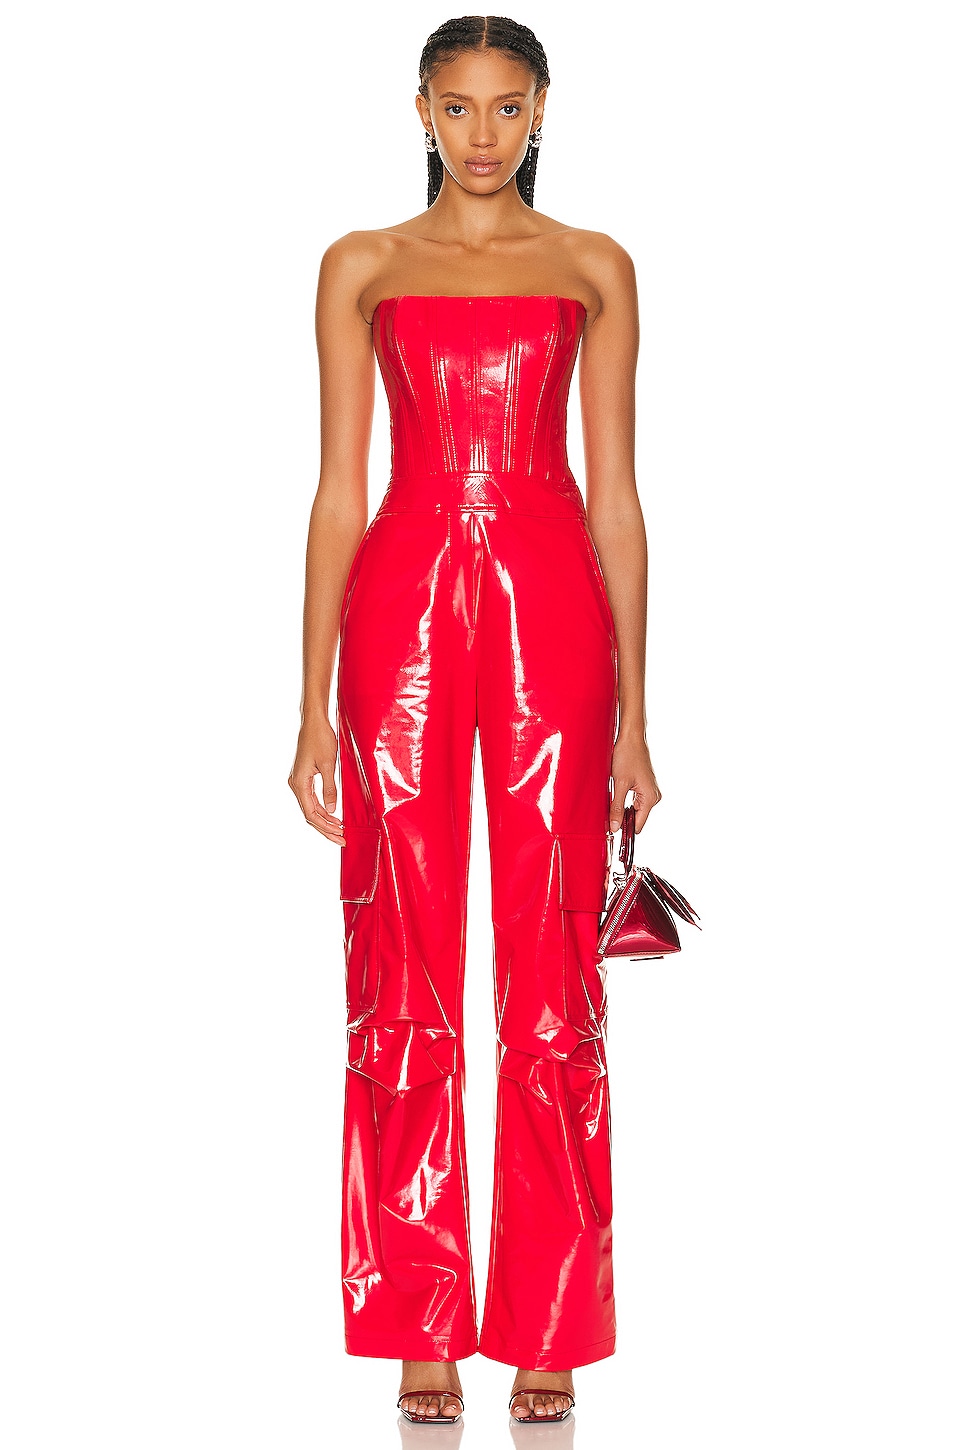 Image 1 of The New Arrivals by Ilkyaz Ozel Giselle Jumpsuit in Pigalle Red